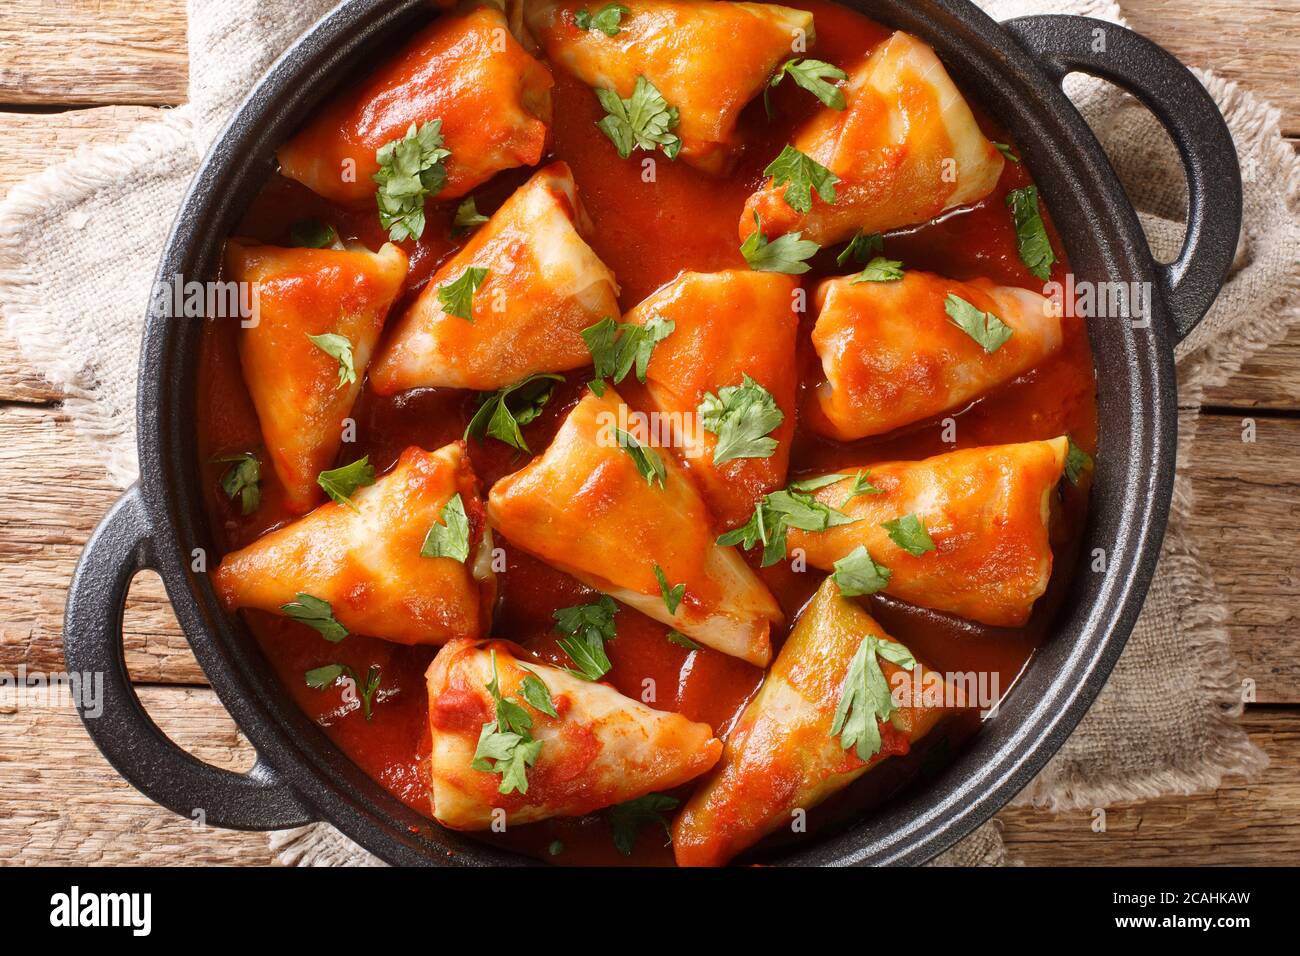 Stuffed cabbage leaves with minced meat and rice in tomato sauce close-up in a bowl on the table. Horizontal top view from above Stock Photo